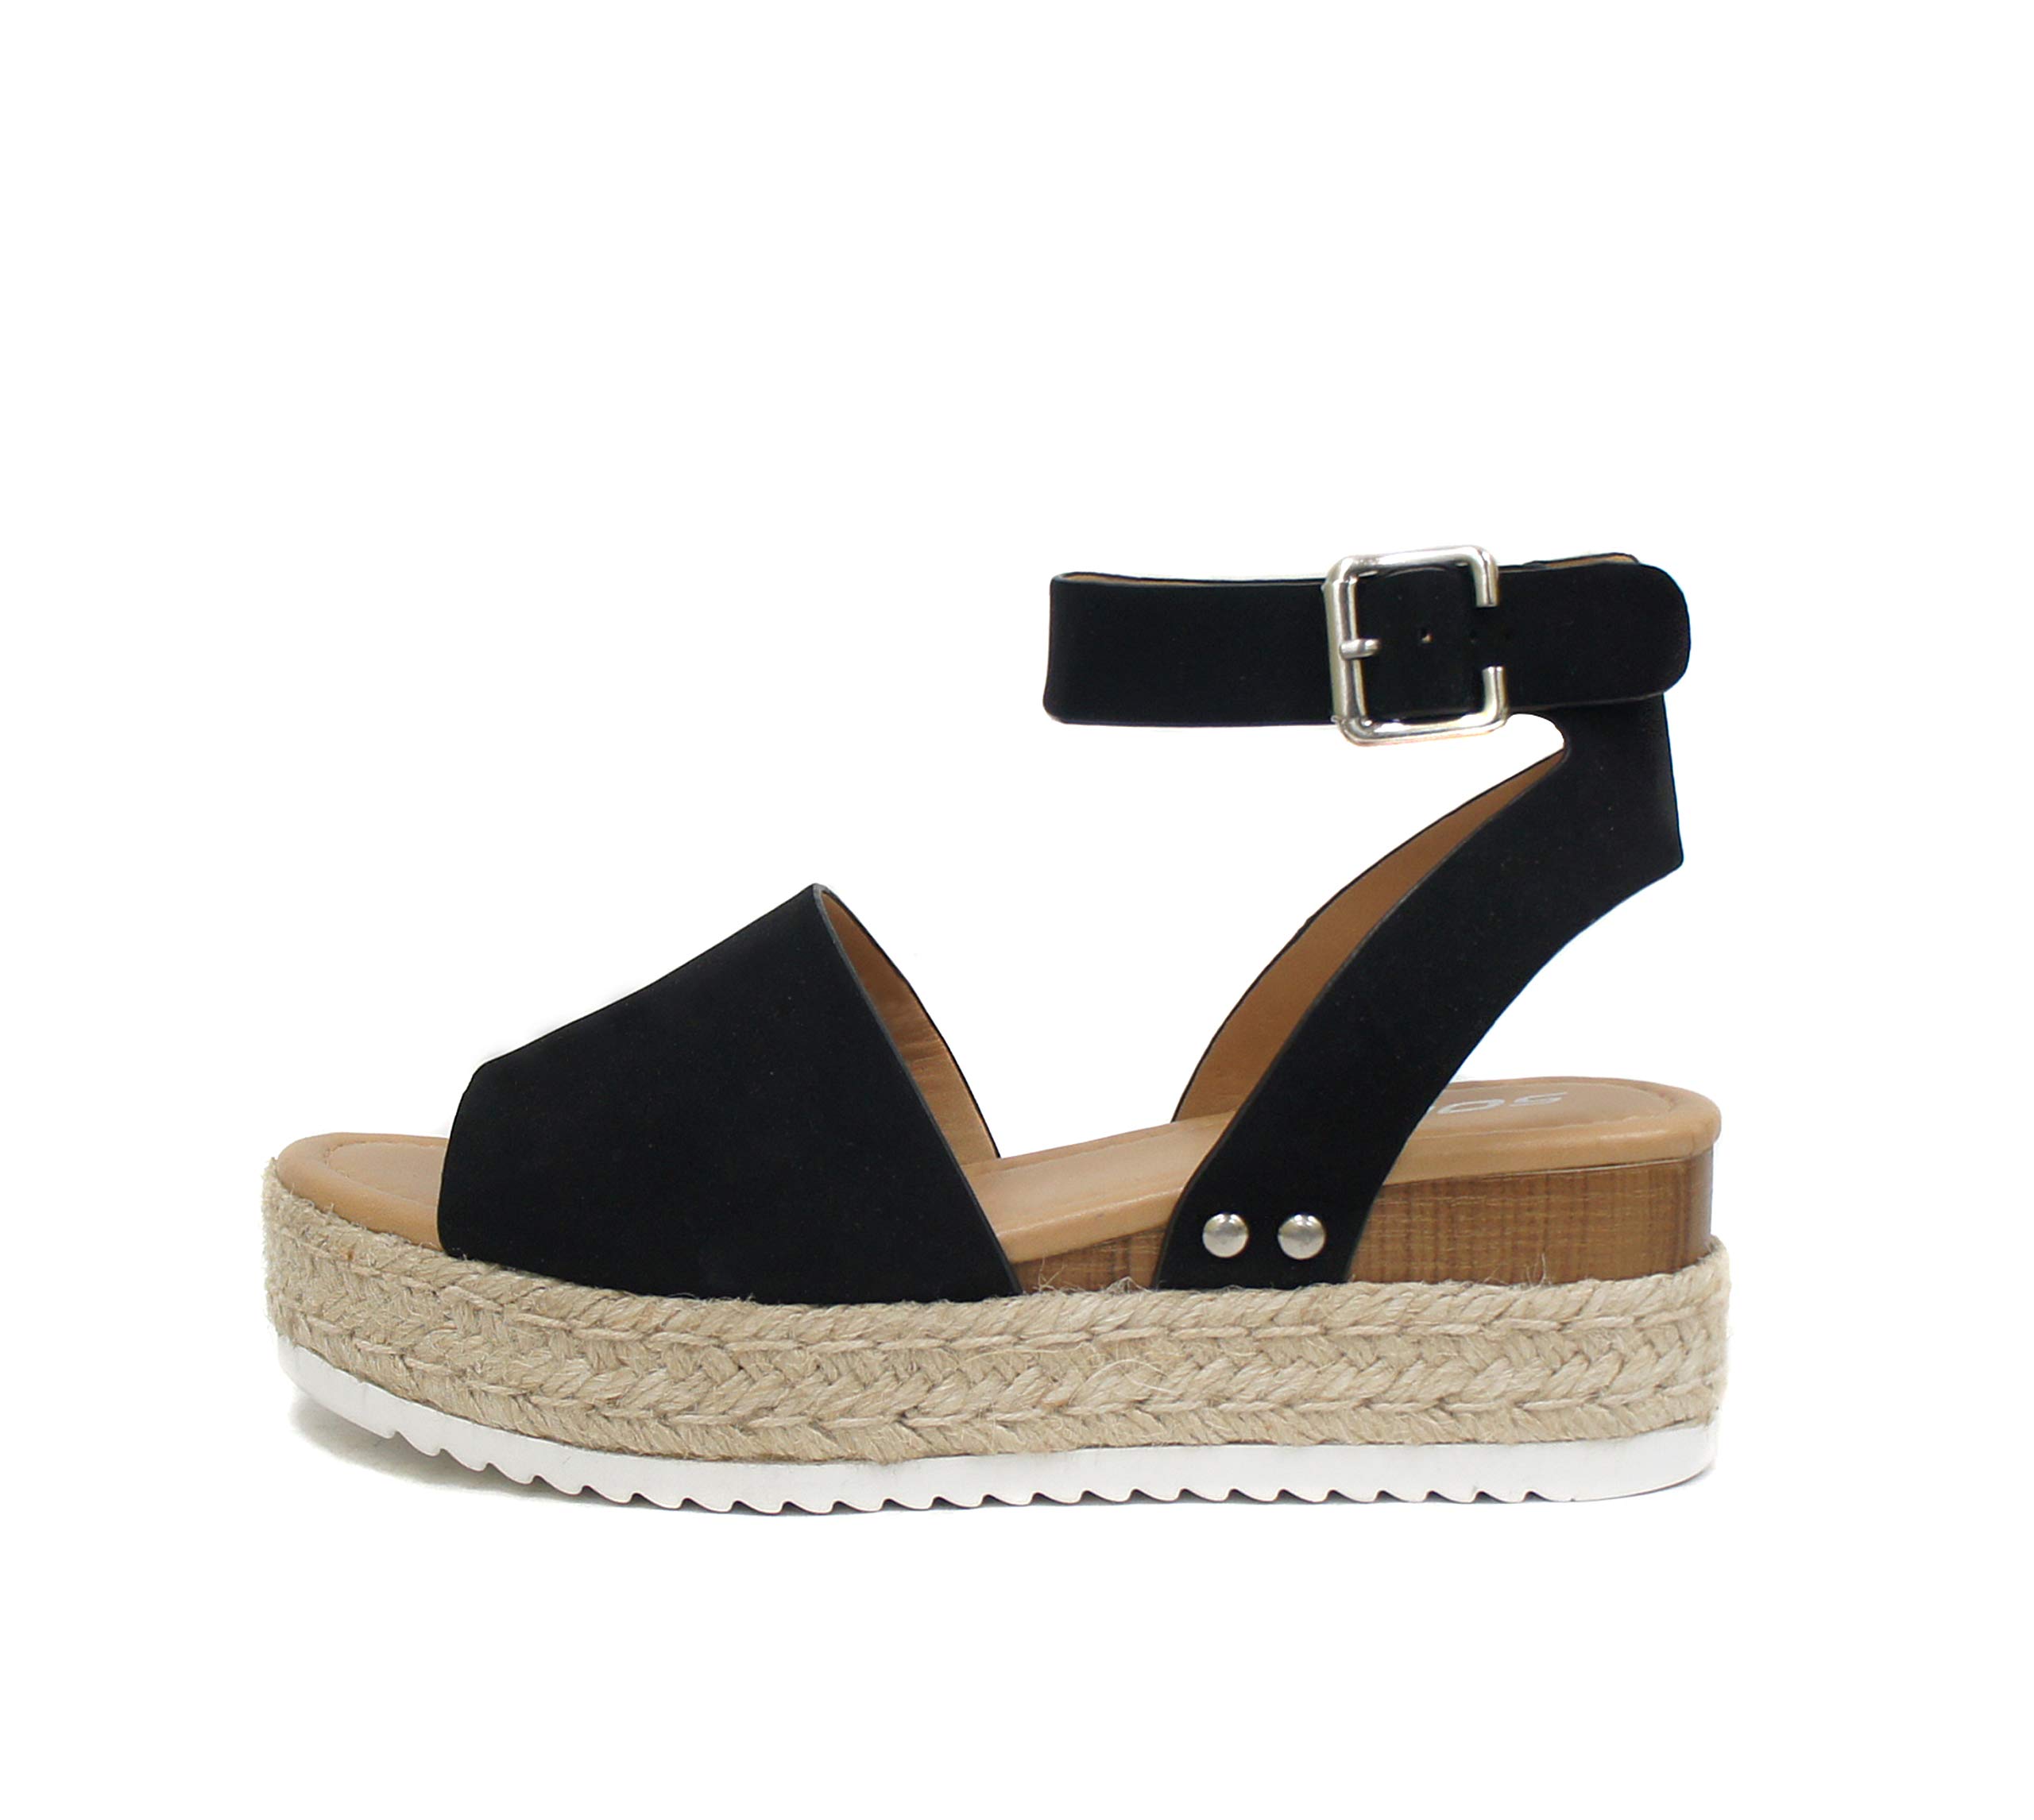 Soda Women's Topic Open Toe Buckle Ankle Strap Espadrille Synthetic sandals